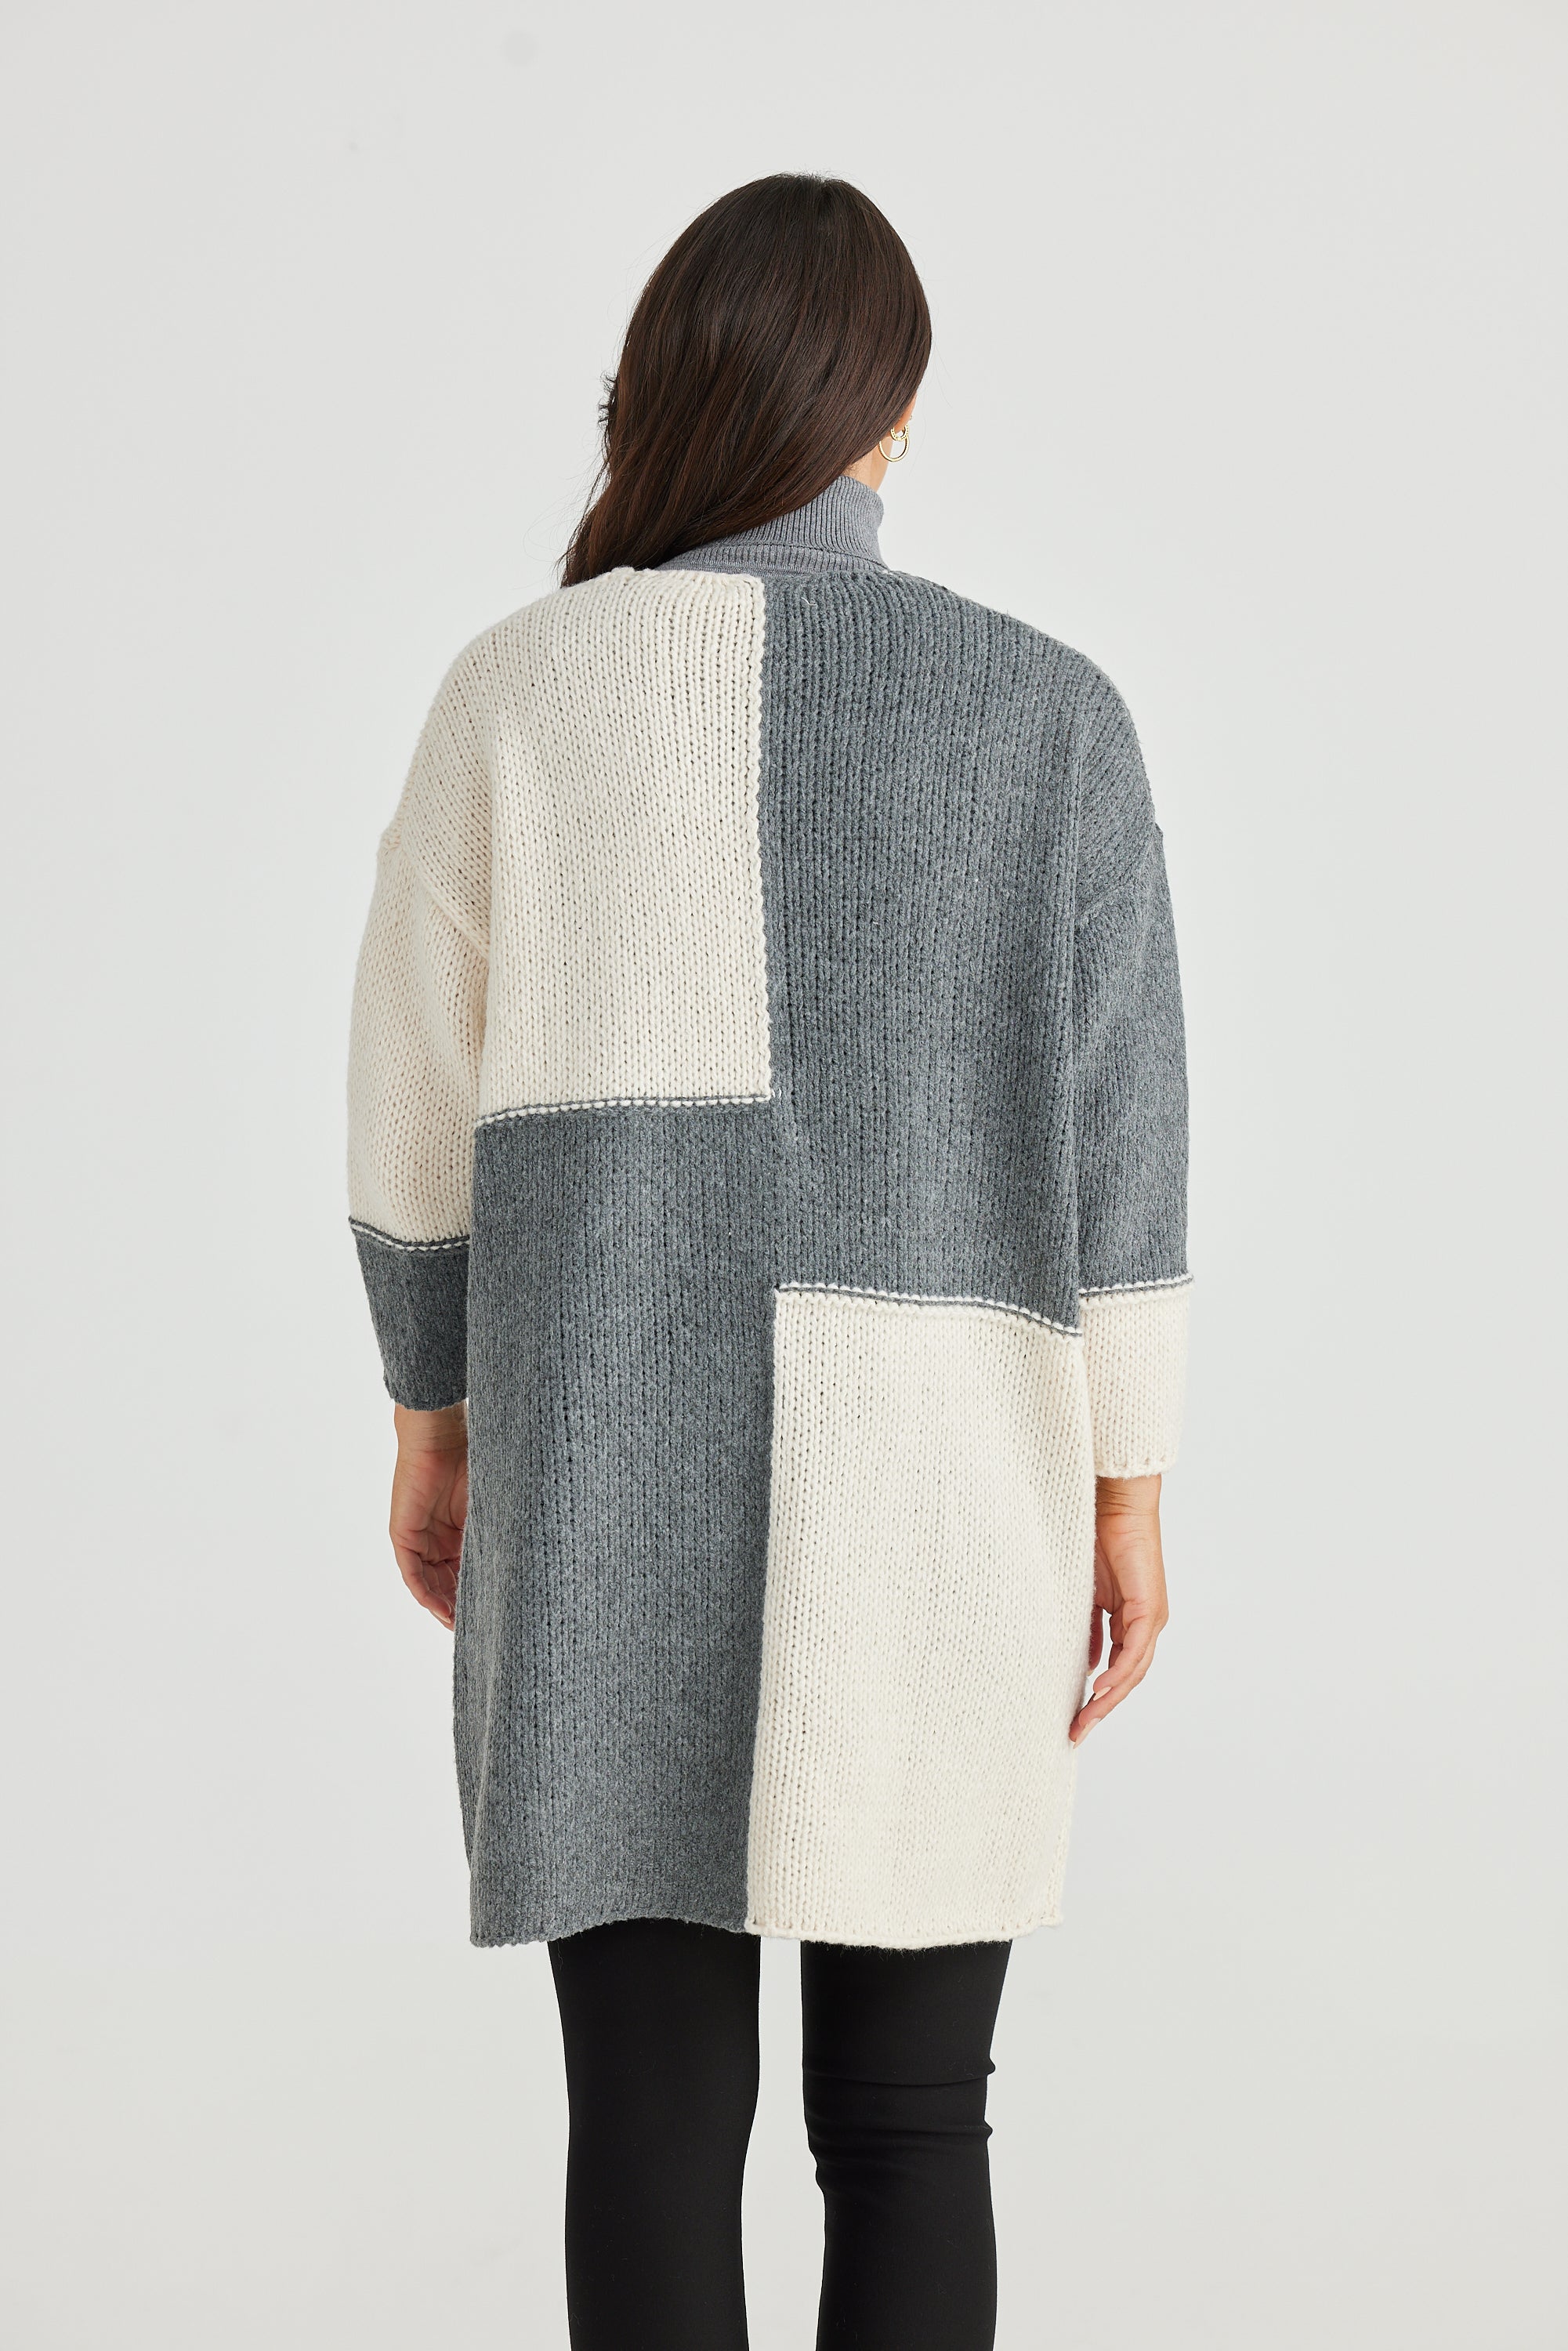 Chester Cardigan - Off White/Charcoal-Knitwear & Jumpers-Brave & True-Onesize-The Bay Room